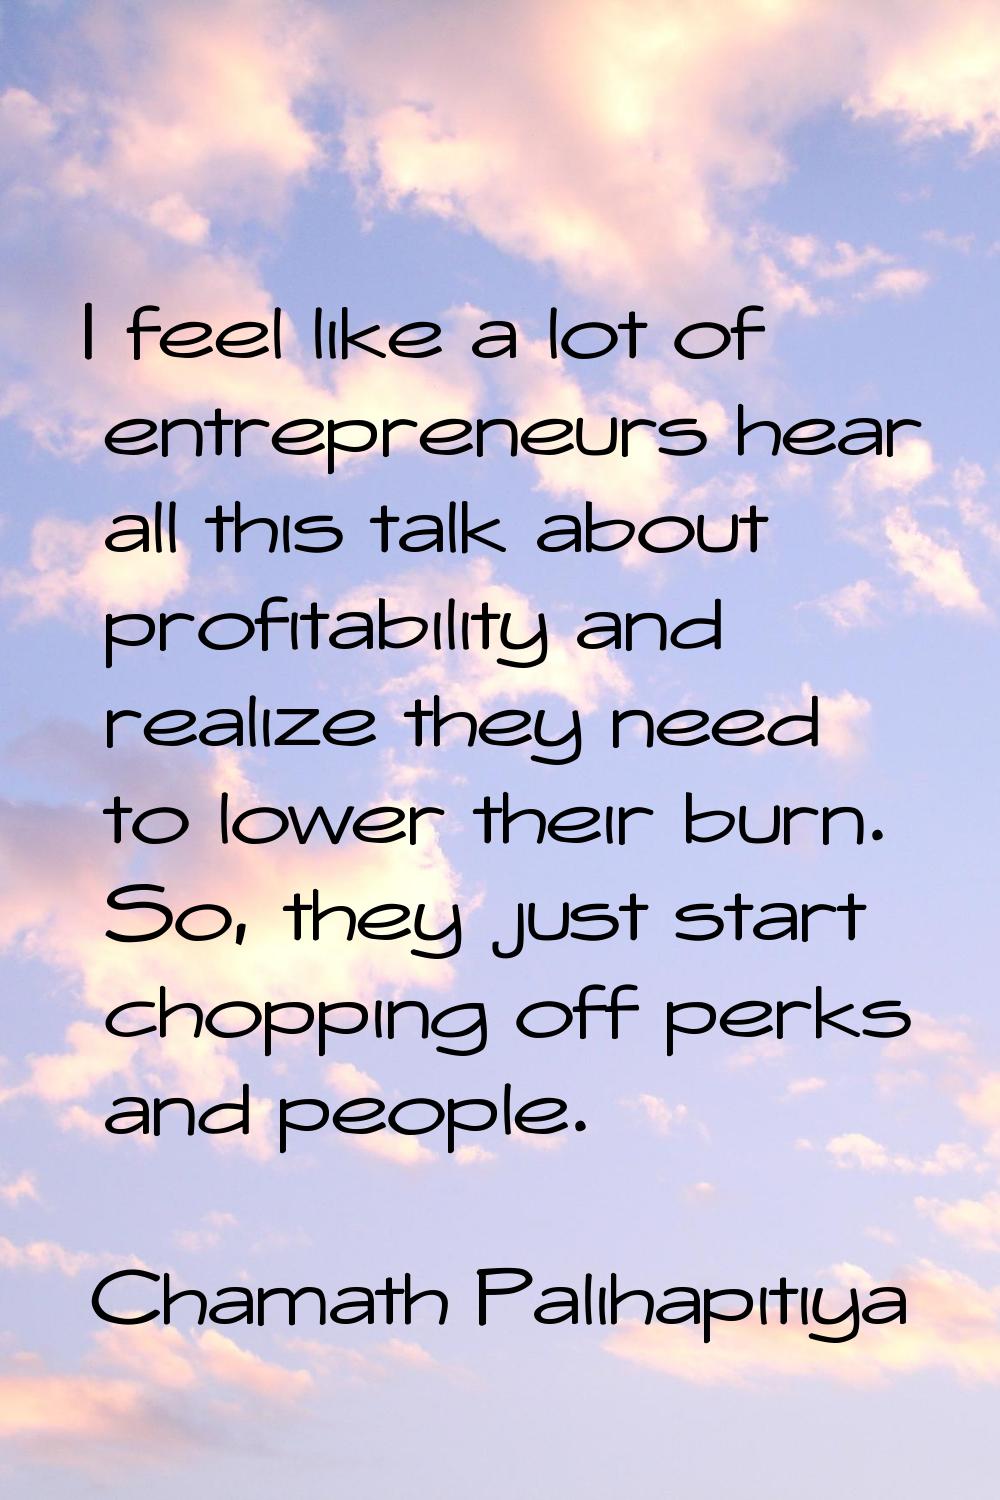 I feel like a lot of entrepreneurs hear all this talk about profitability and realize they need to 